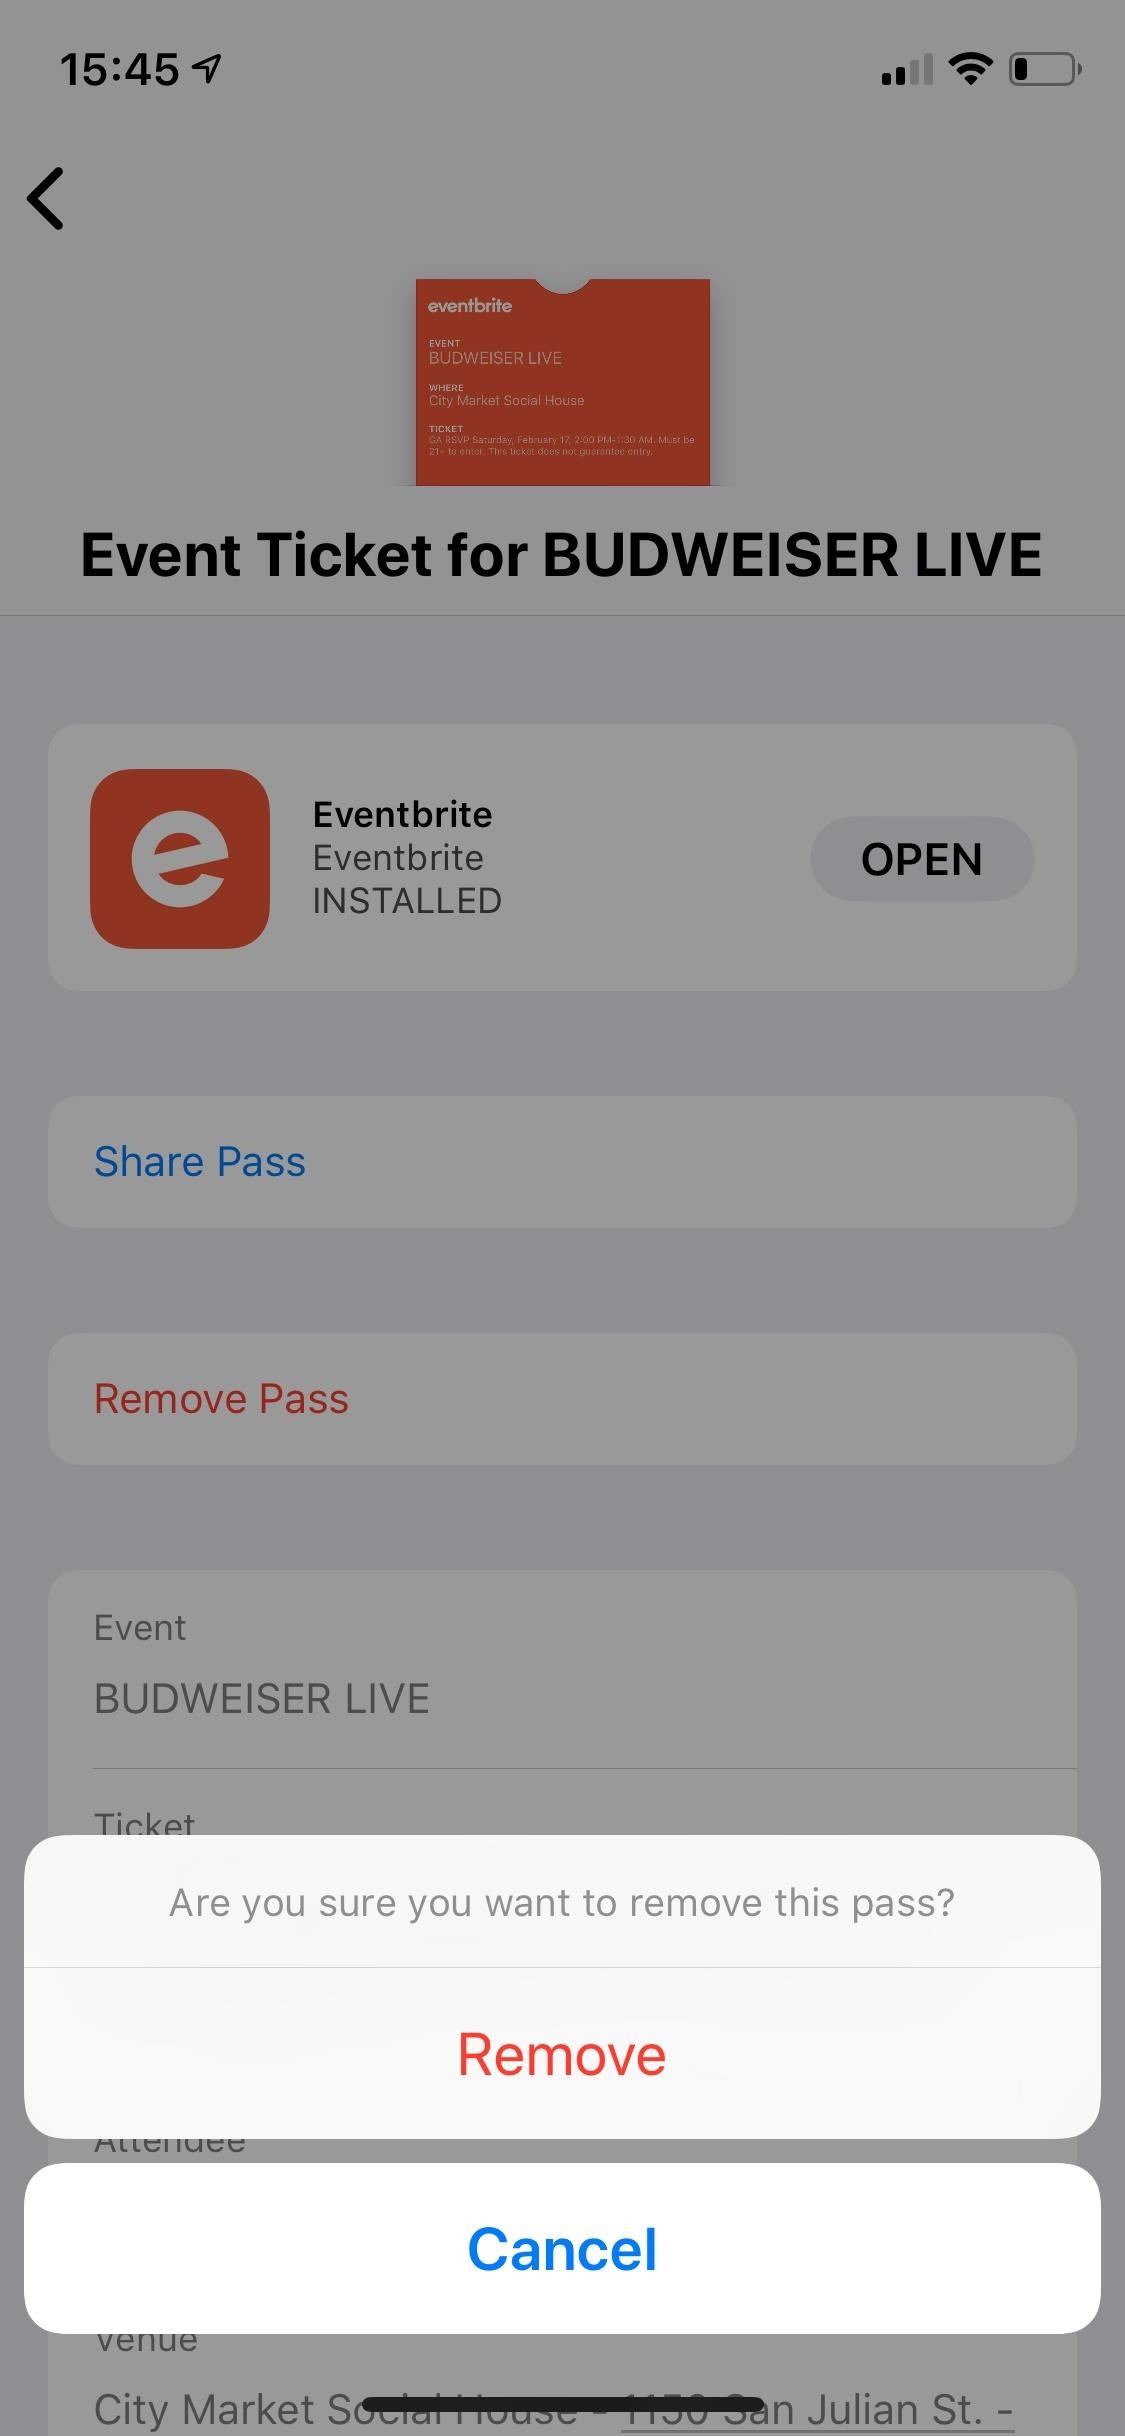 How to Add Passes, Tickets, Rewards, Coupons, Gift Cards, IDs & More to Apple Wallet for iPhone